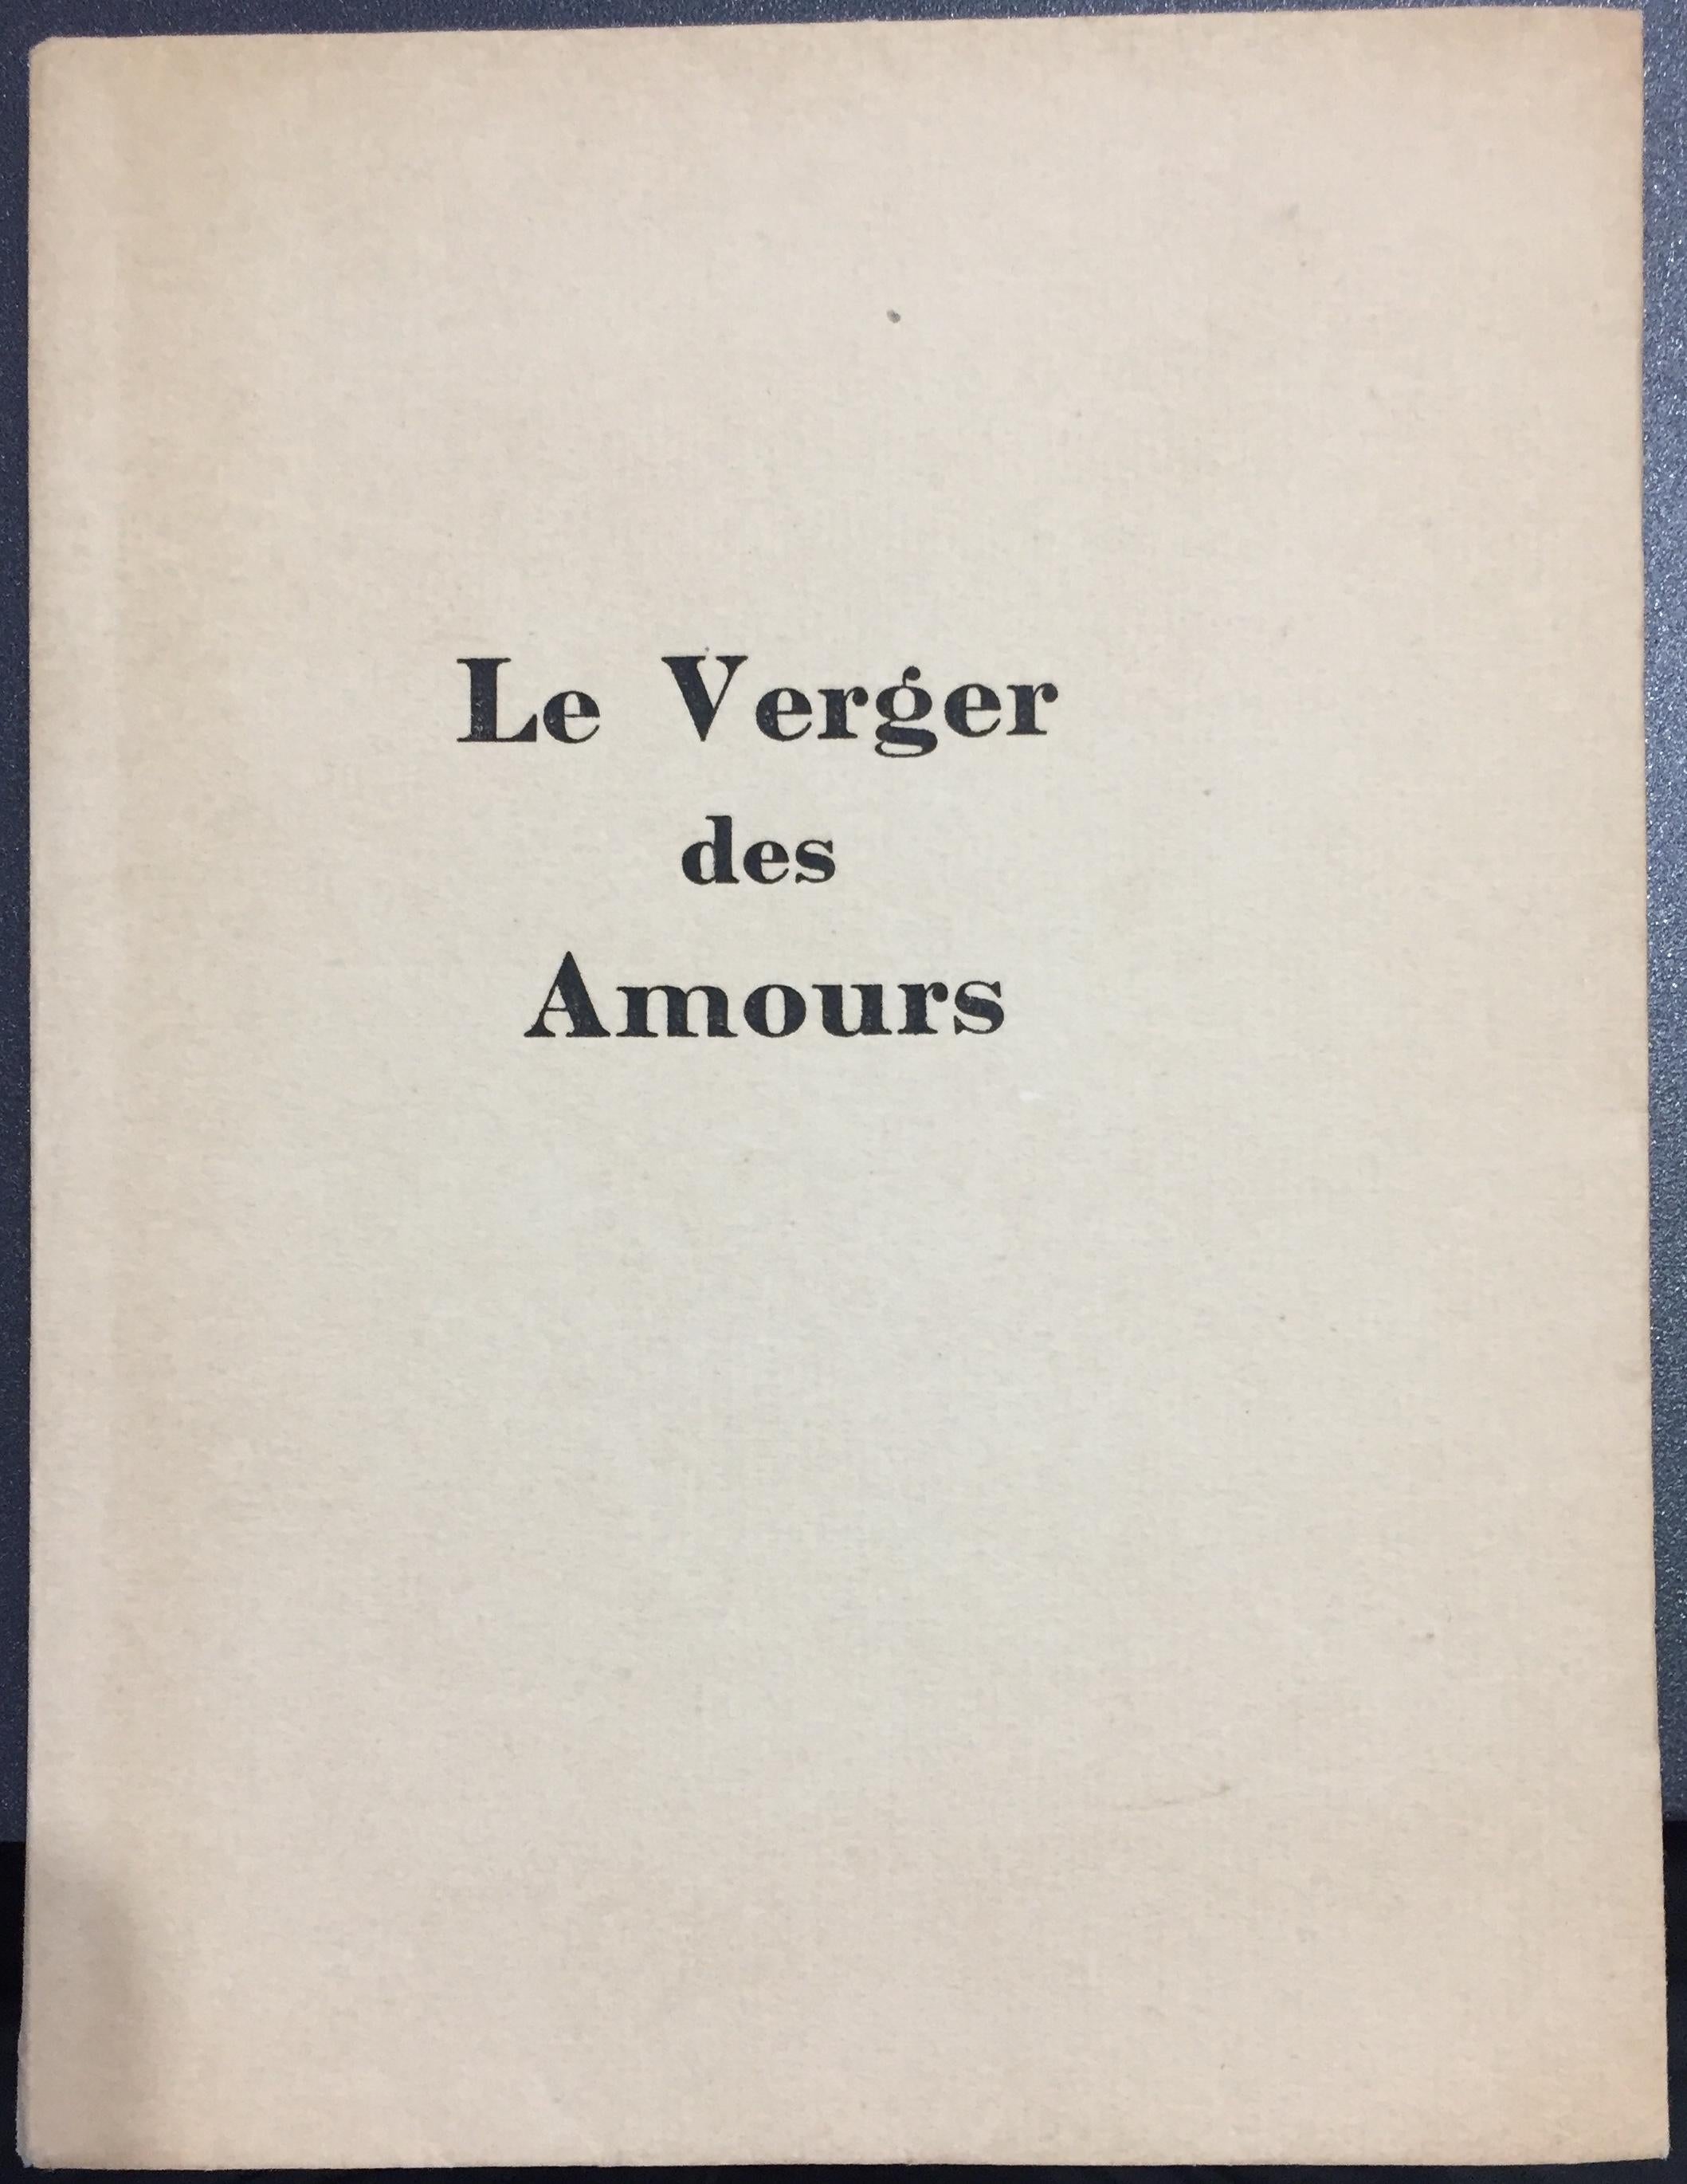 Le Verger des Amours - Rare Book Illustrated by L.T. Foujita - 1927 For Sale 2